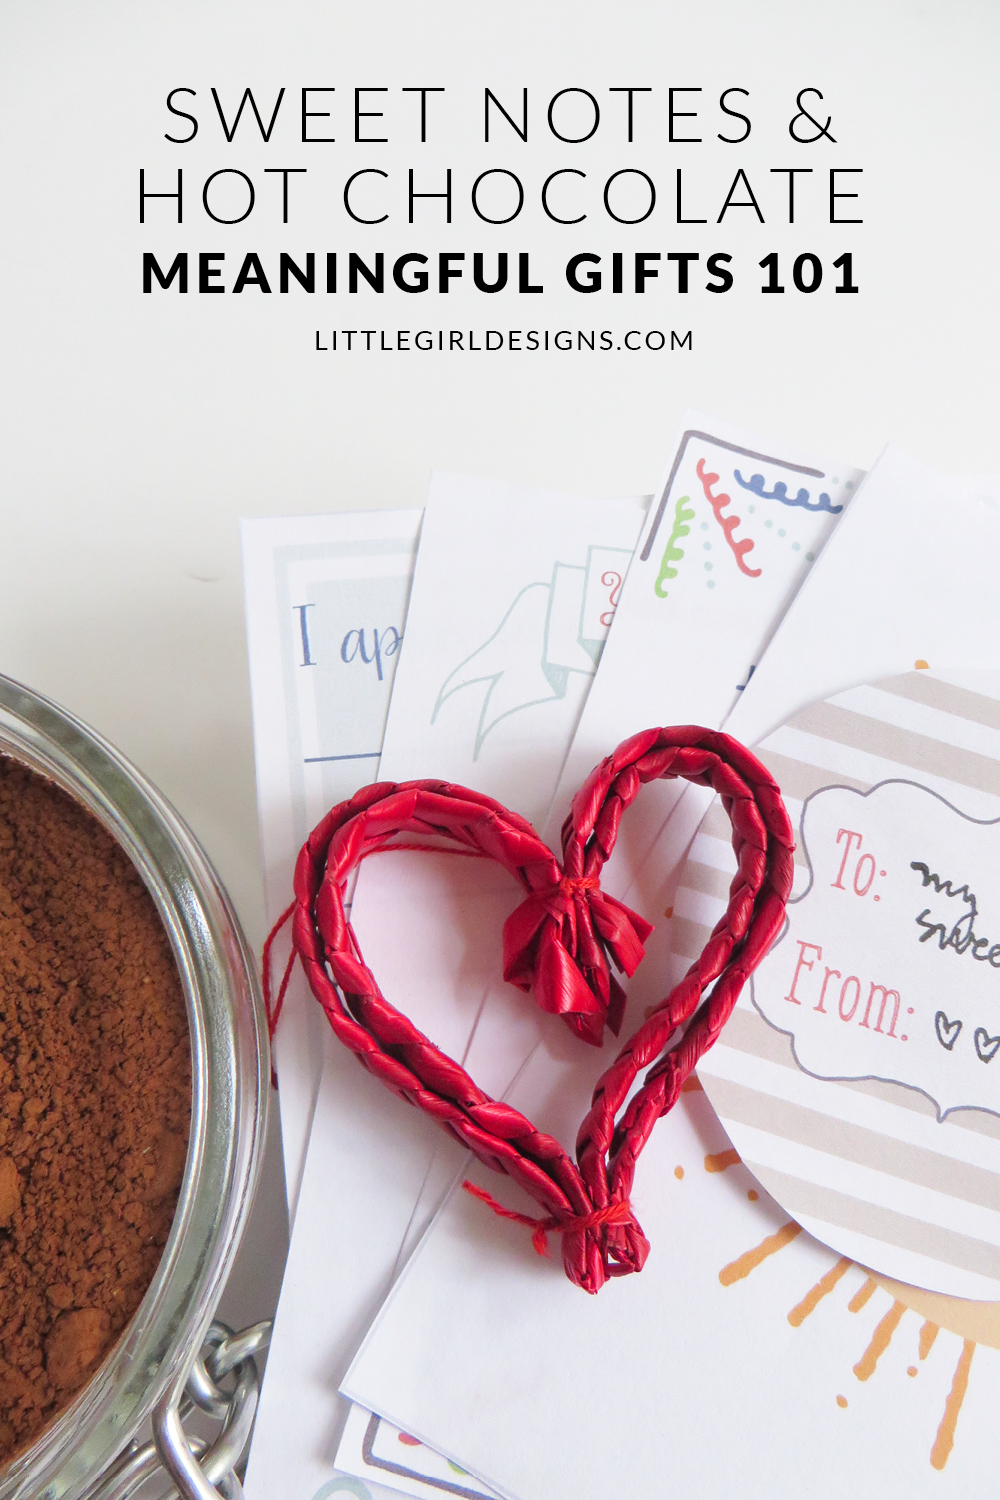 Sweet Notes & Hot Chocolate - Meaninful Gifts 101 - Some thoughts on how to make gifts that are meaninful plus the most delicious hot chocolate recipe you'll ever taste. (Makes a great gift, but I recommend making a double batch so you won't be too sad giving it away. ;)) via littlegirldesigns.com